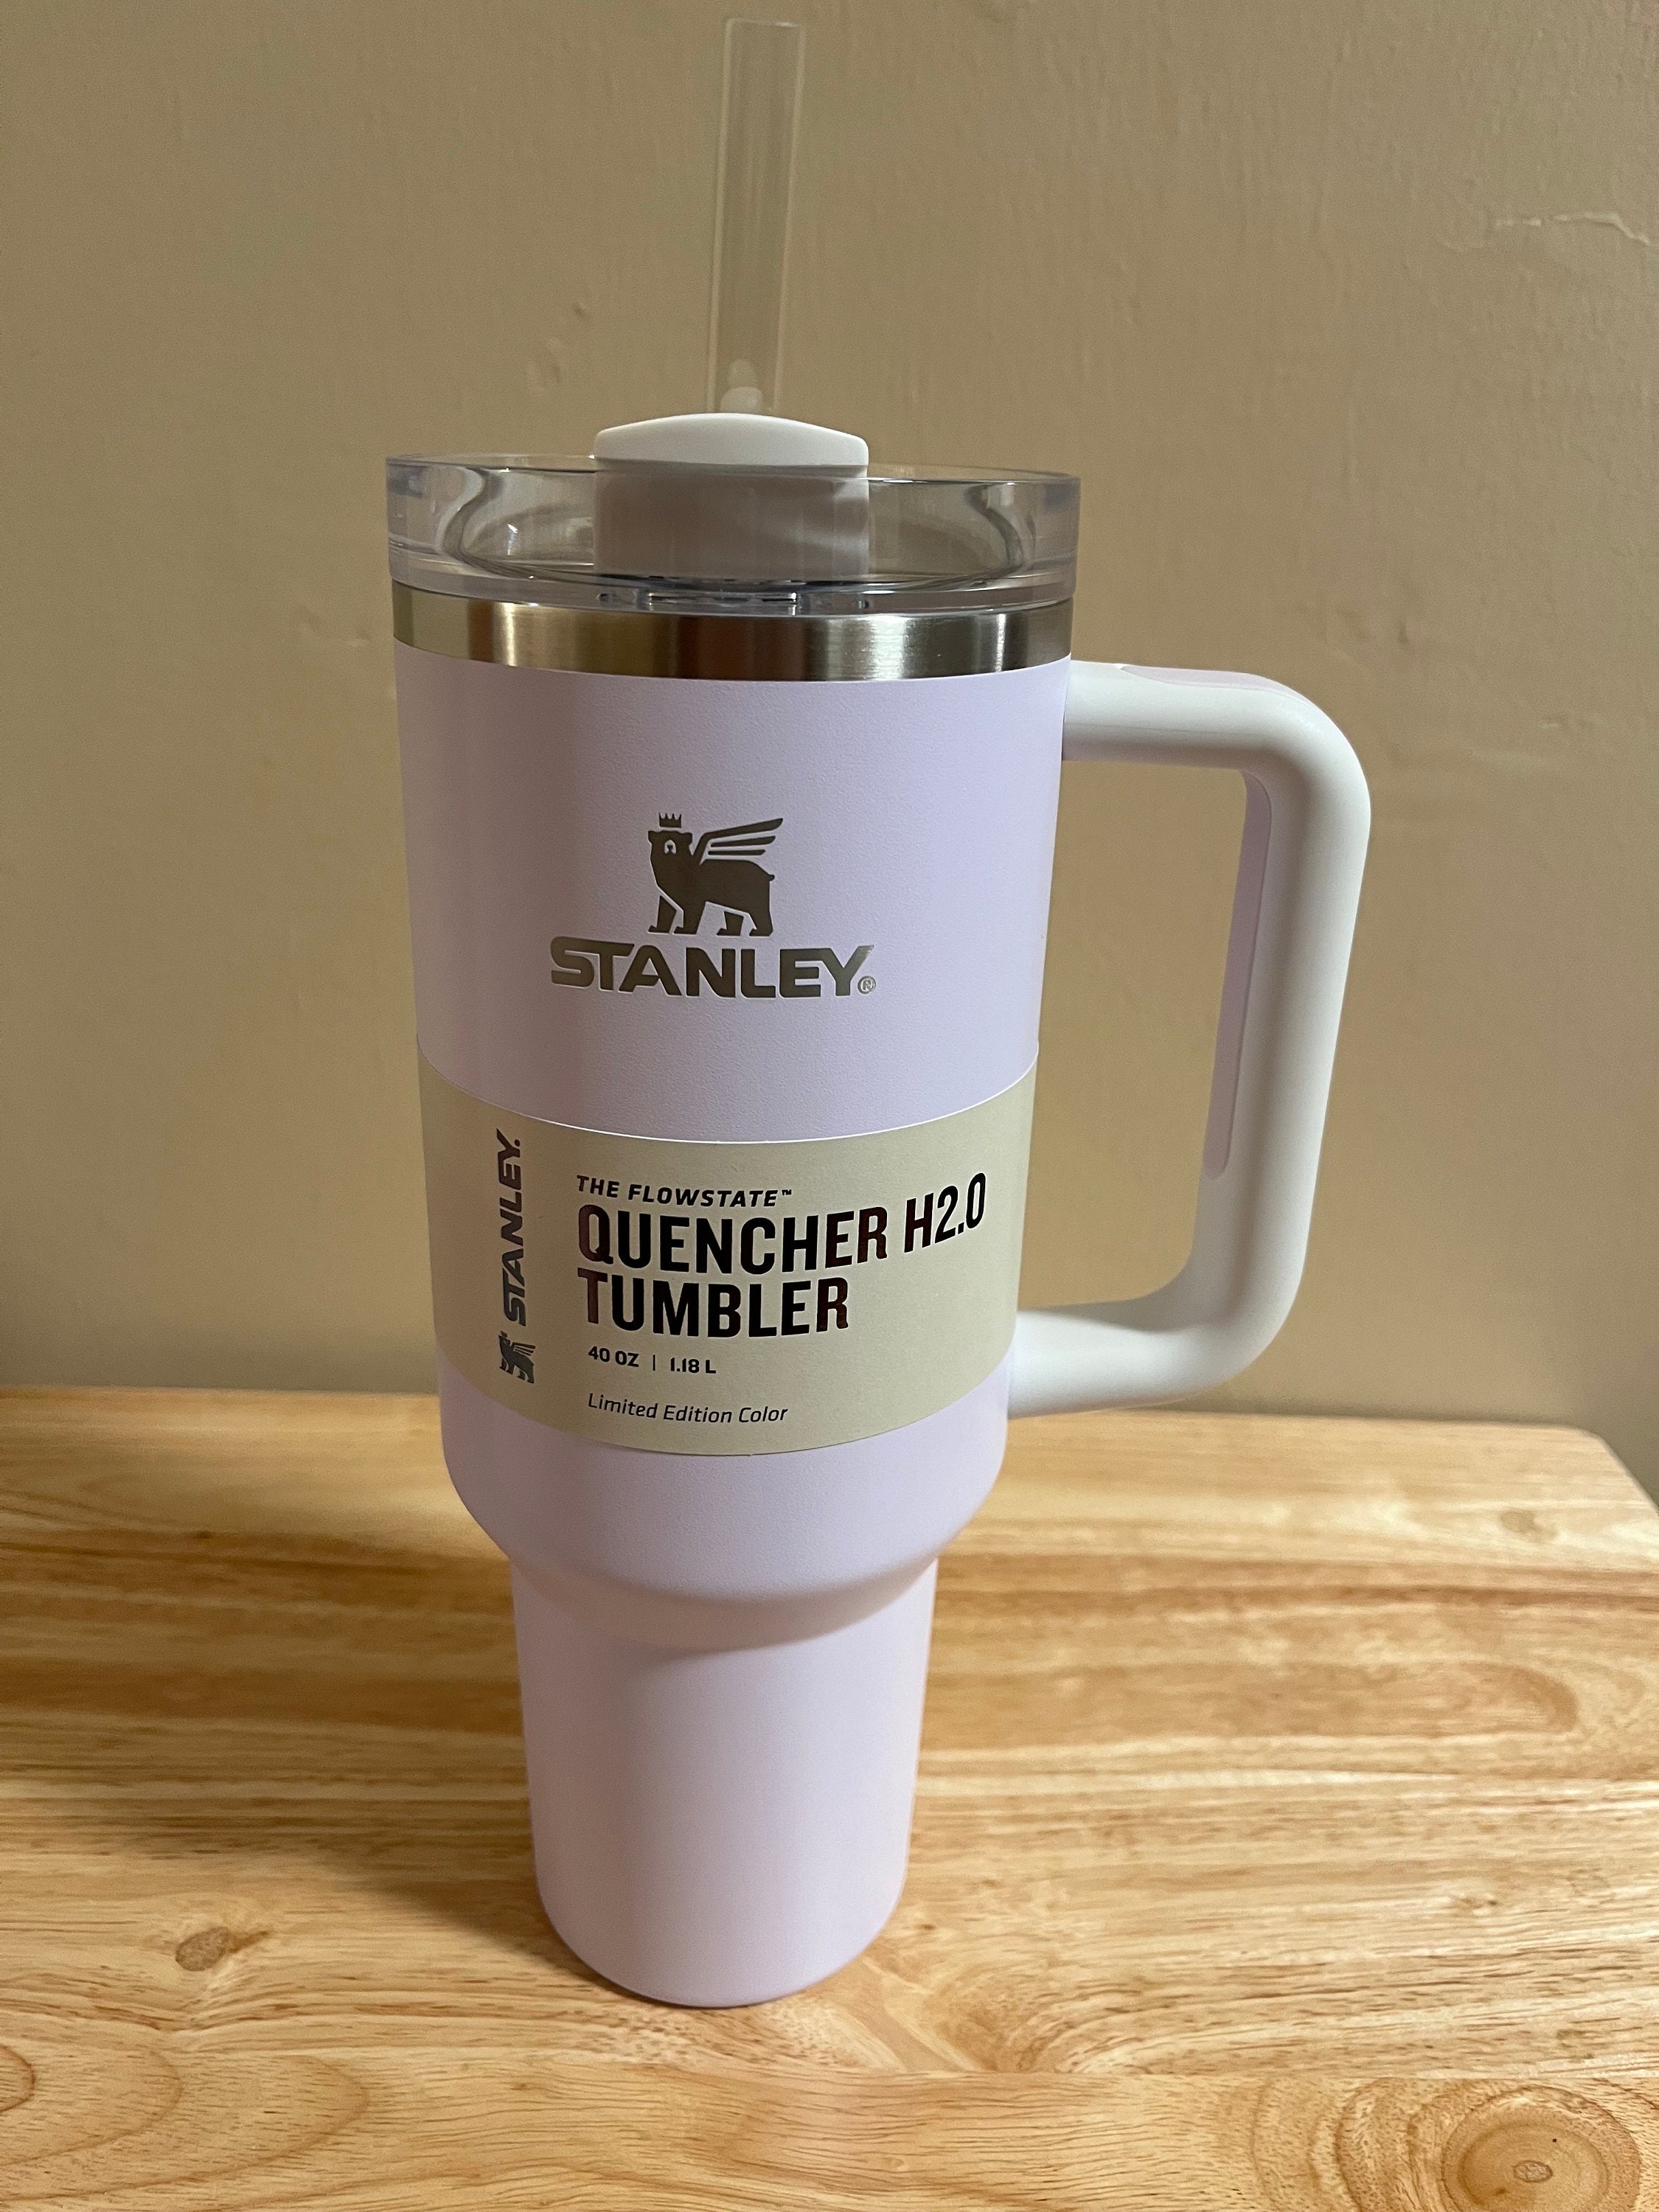 Stanley 40 Oz. Quencher H20 Tumbler Limited Edition Wisteria for